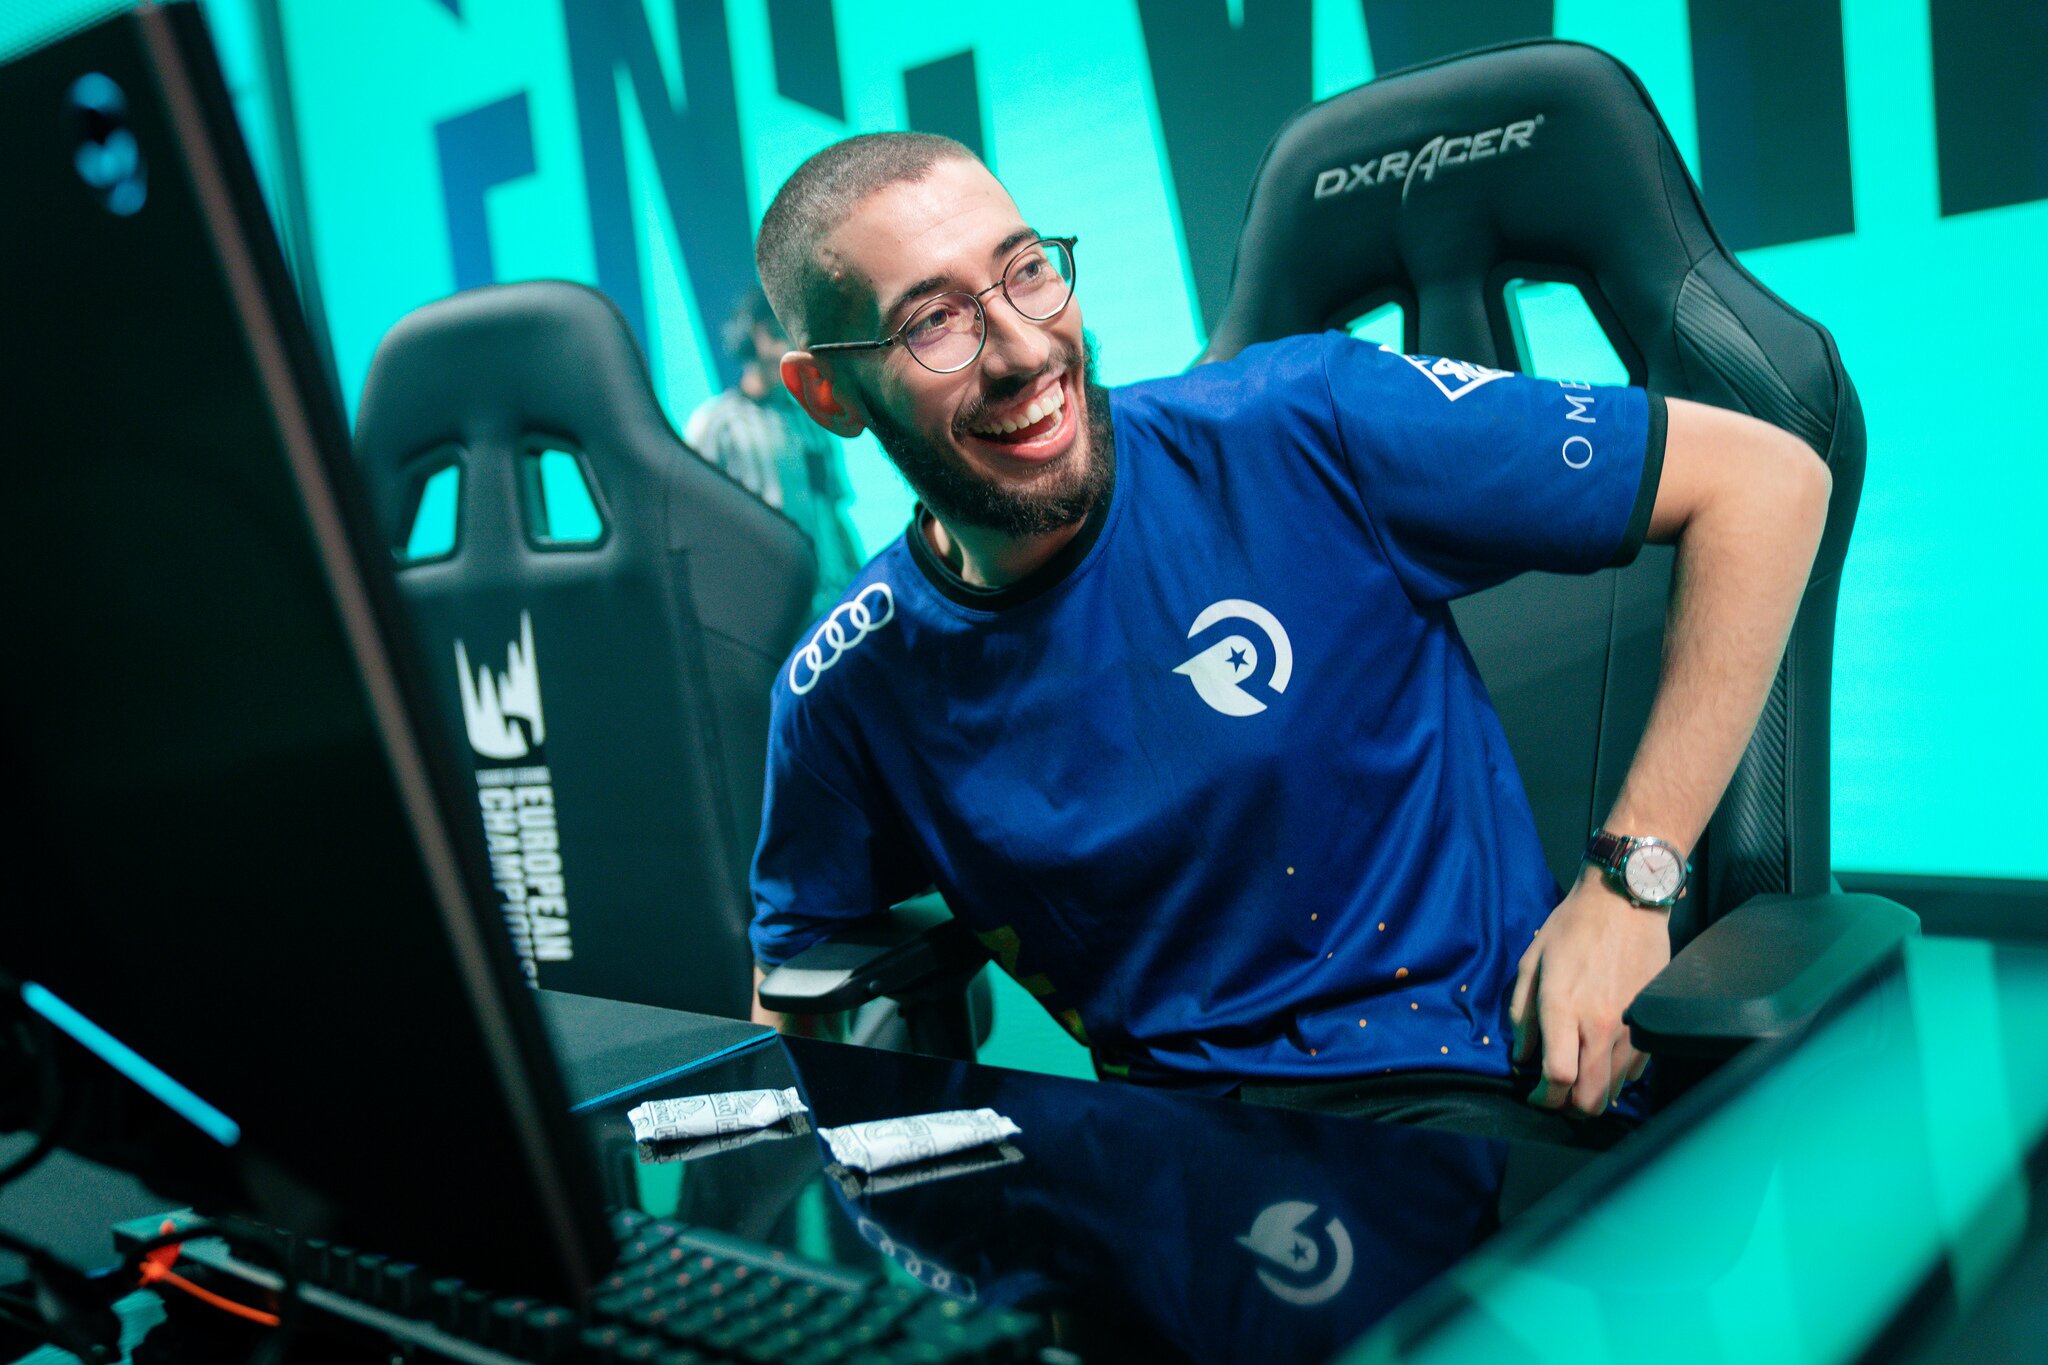 Origen handed G2 Esports their first loss of the split (Photo courtesy of Riot Games)